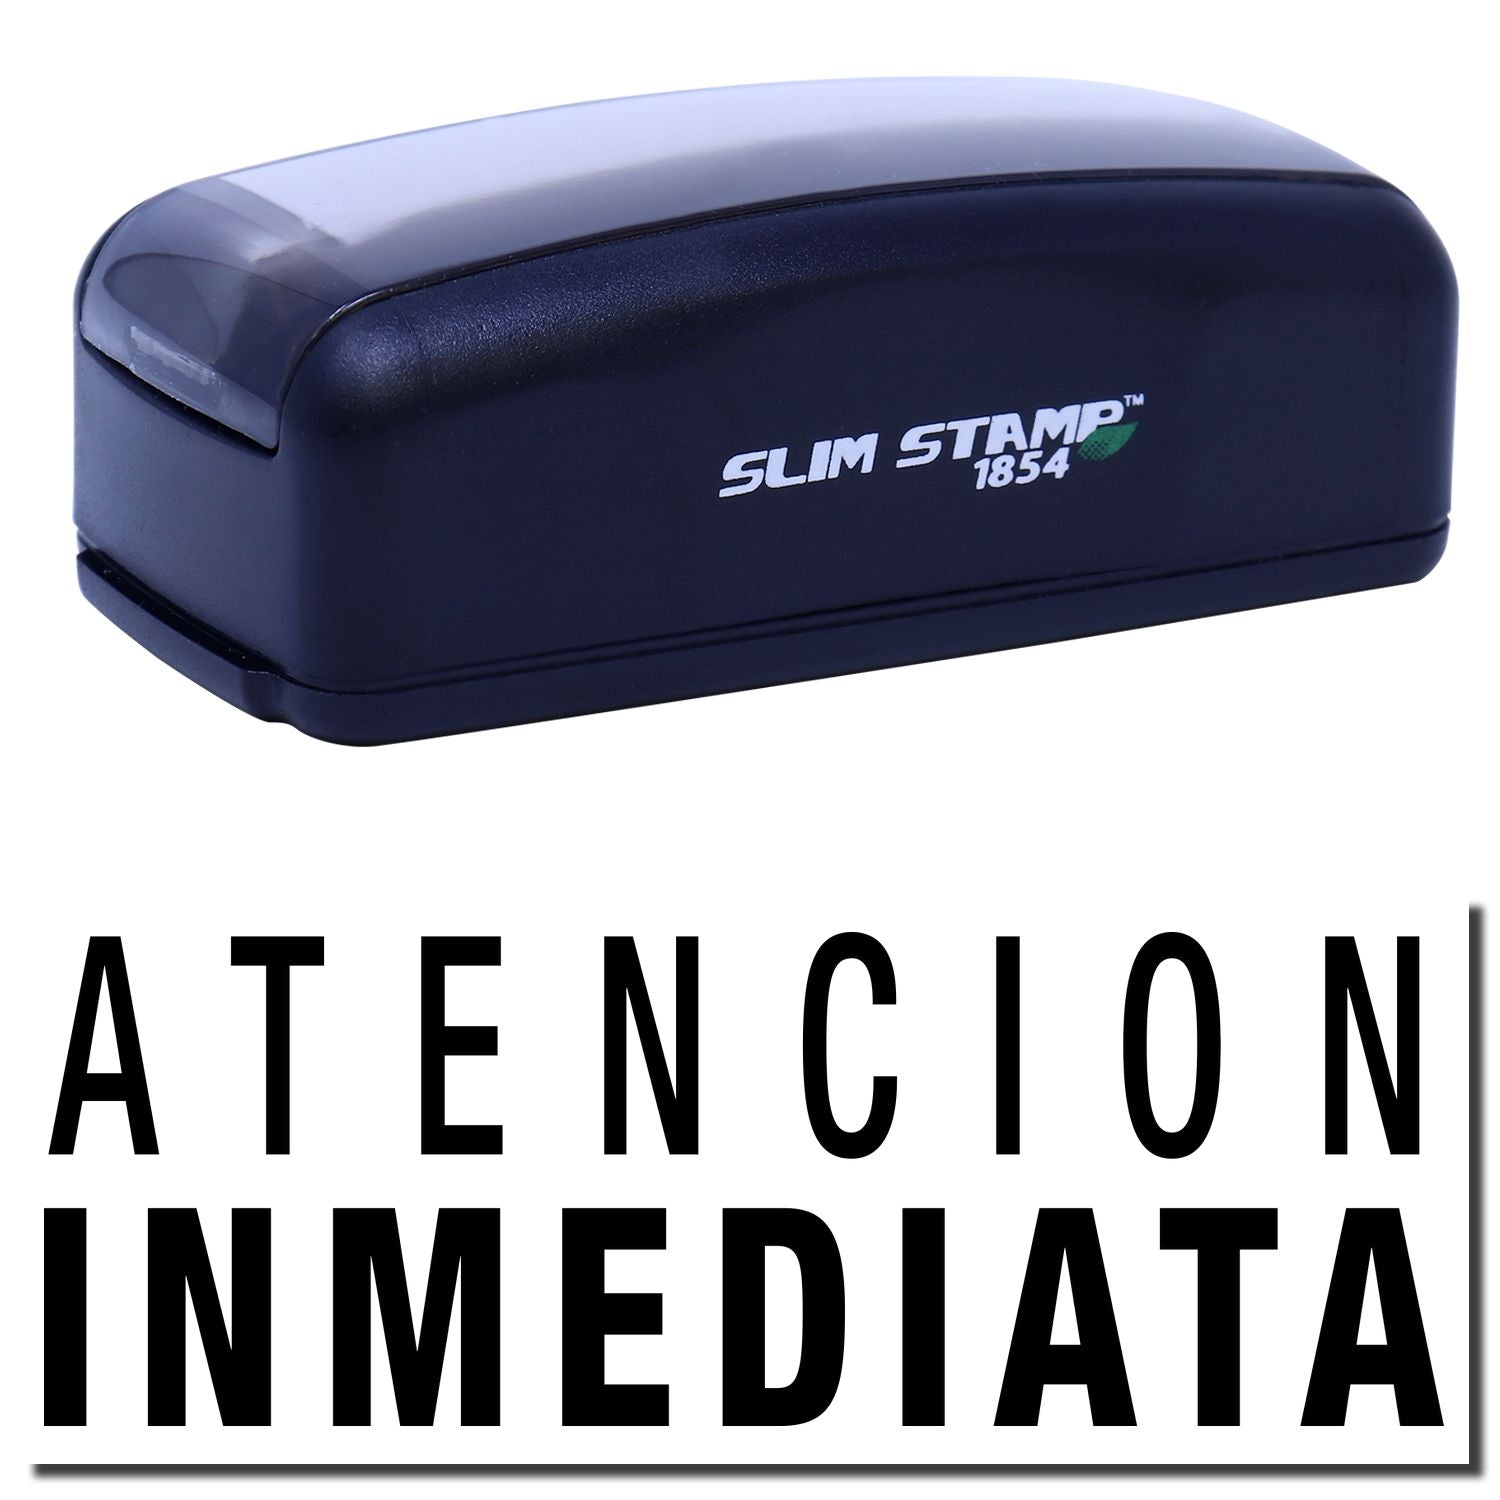 A stock office pre-inked stamp with a stamped image showing how the text "ATENCION INMEDIATA" in a large font is displayed after stamping.